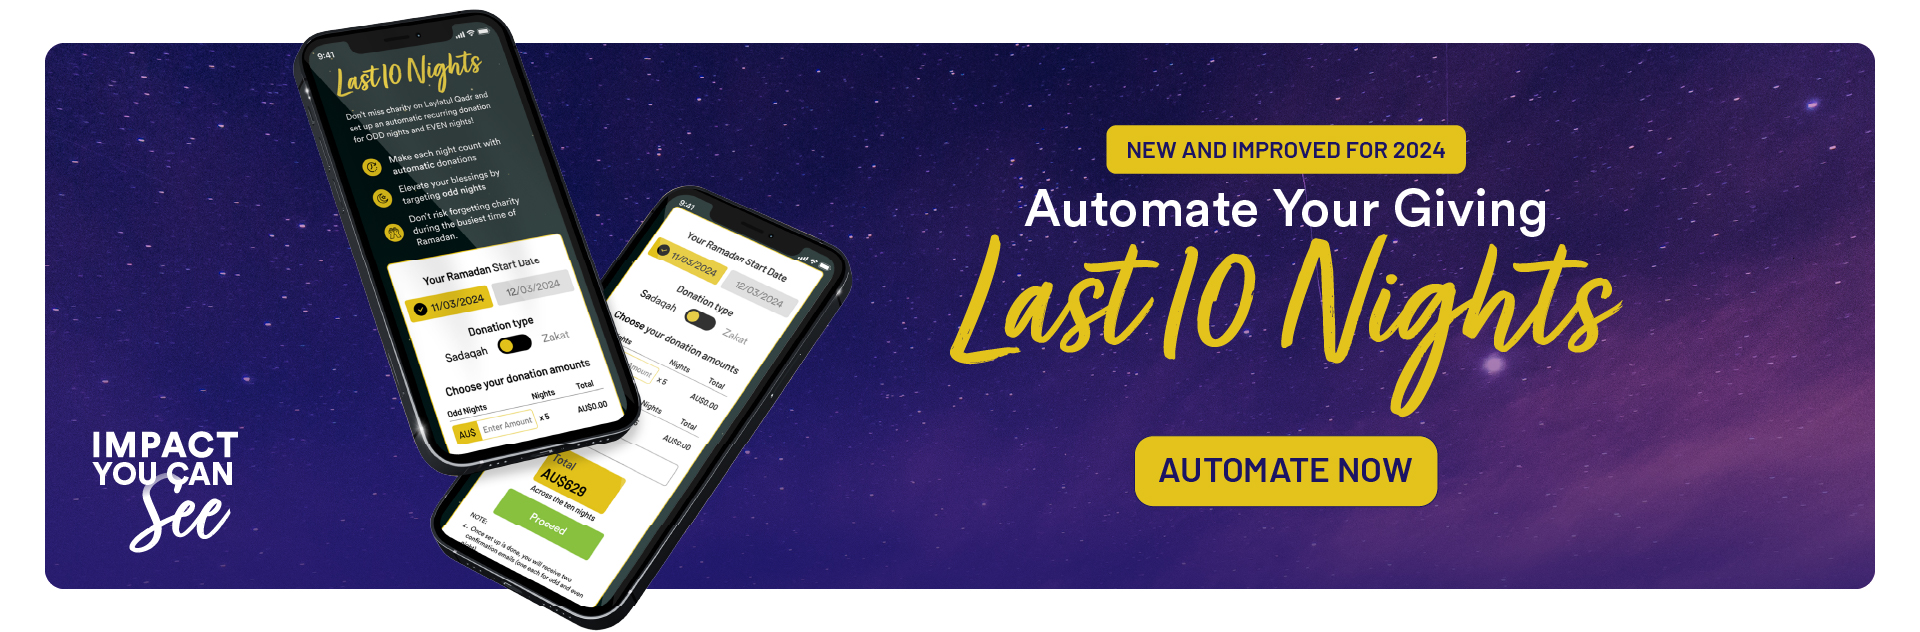 Automate your giving for the Last 10 Nights - Setup Now